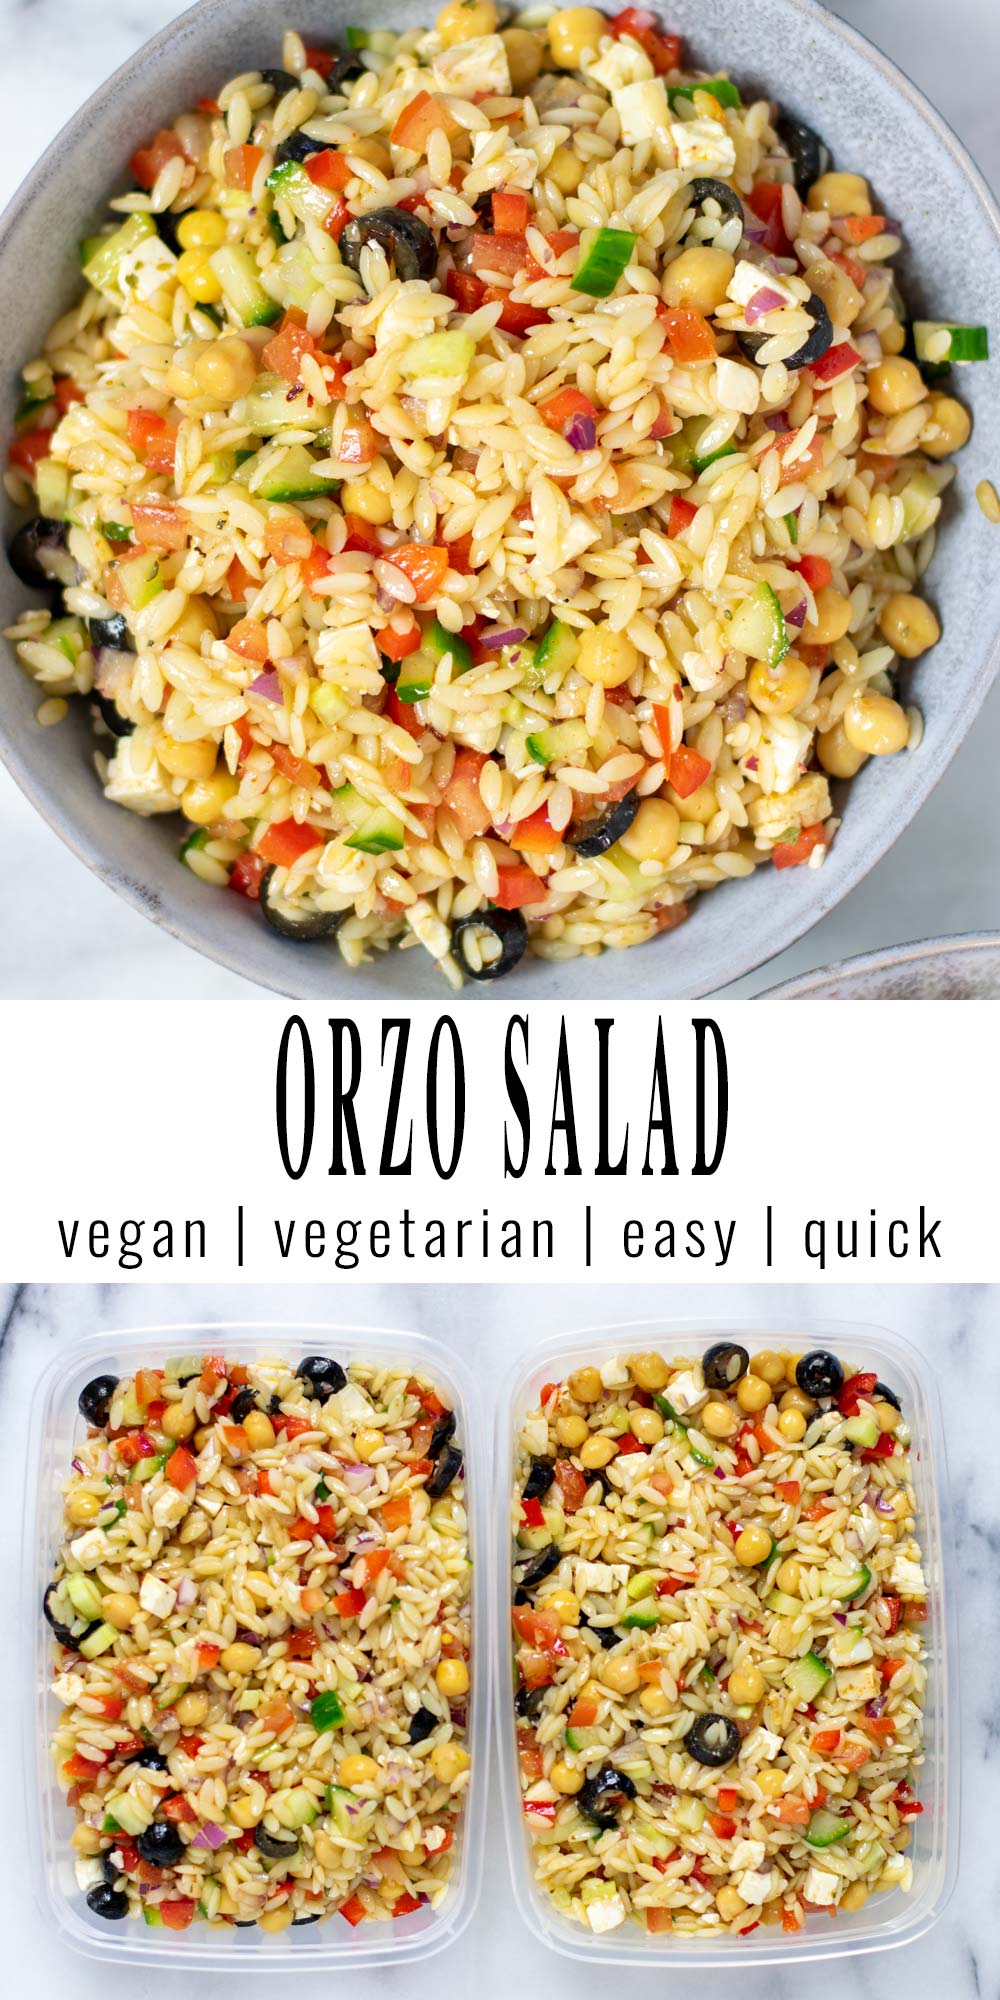 Collage of two pictures of the Orzo Salad with recipe title text.